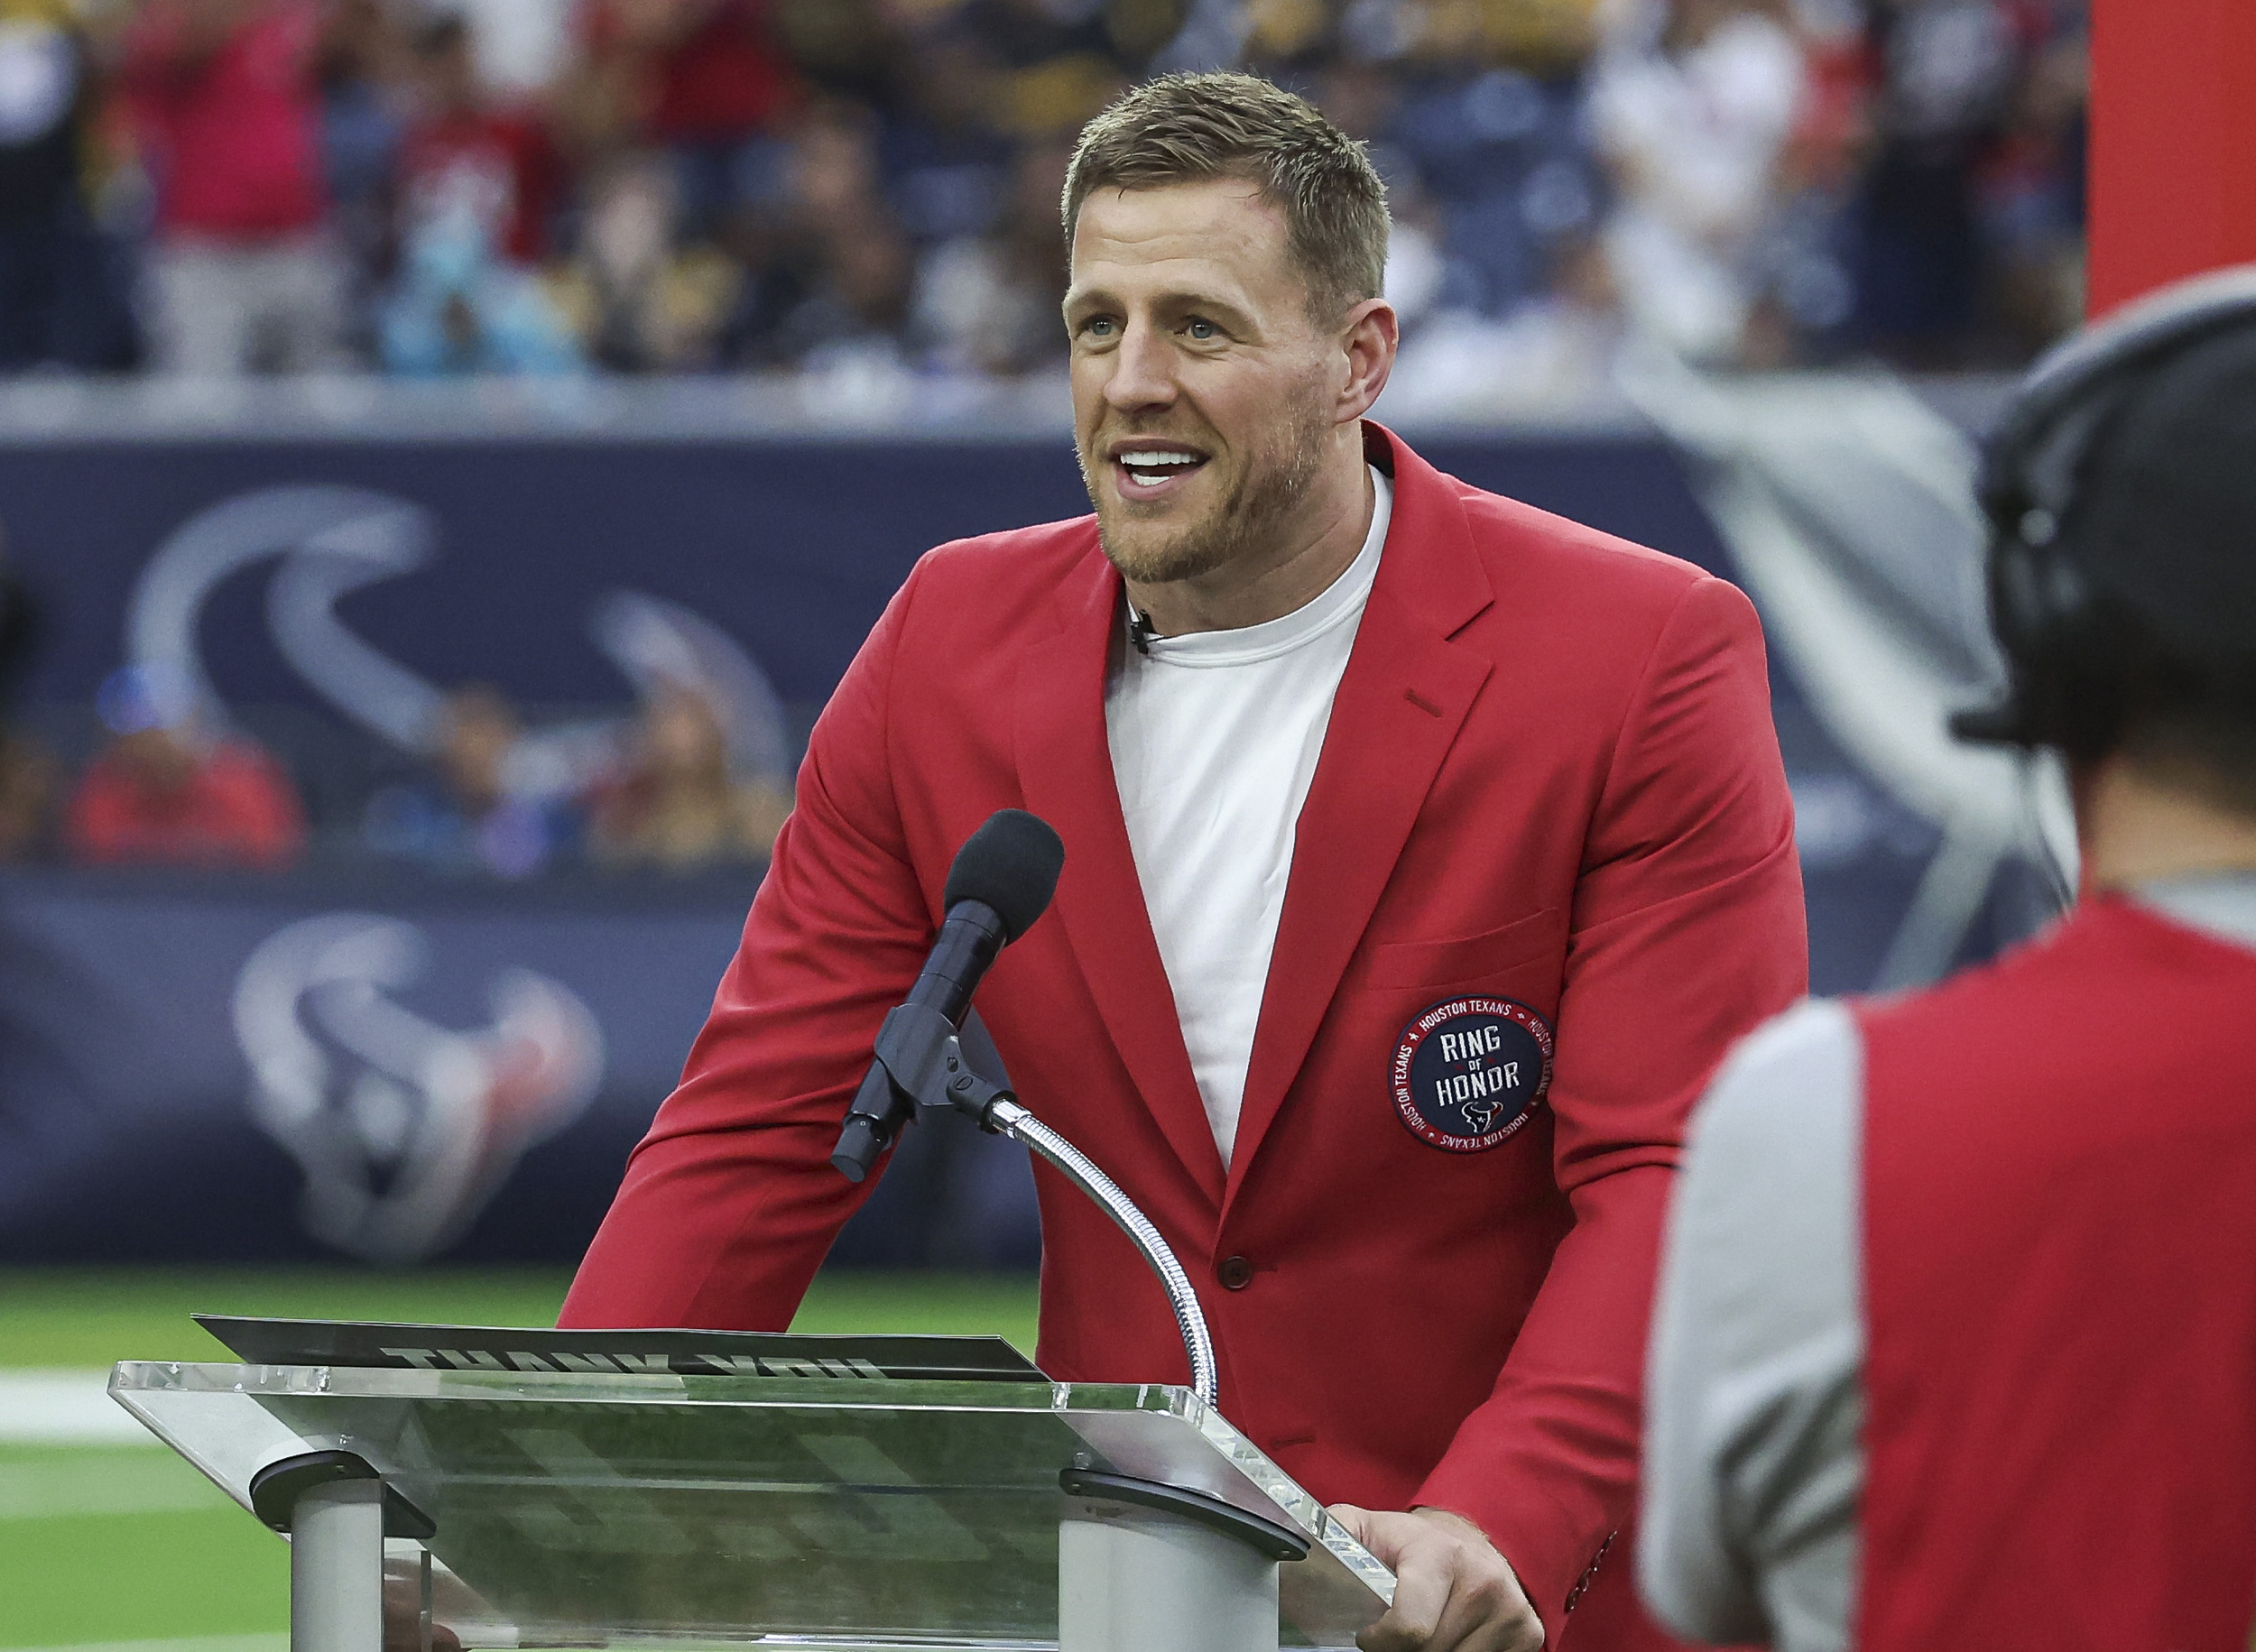 j.j. watt reveals the team he wishes he got to play for before retiring